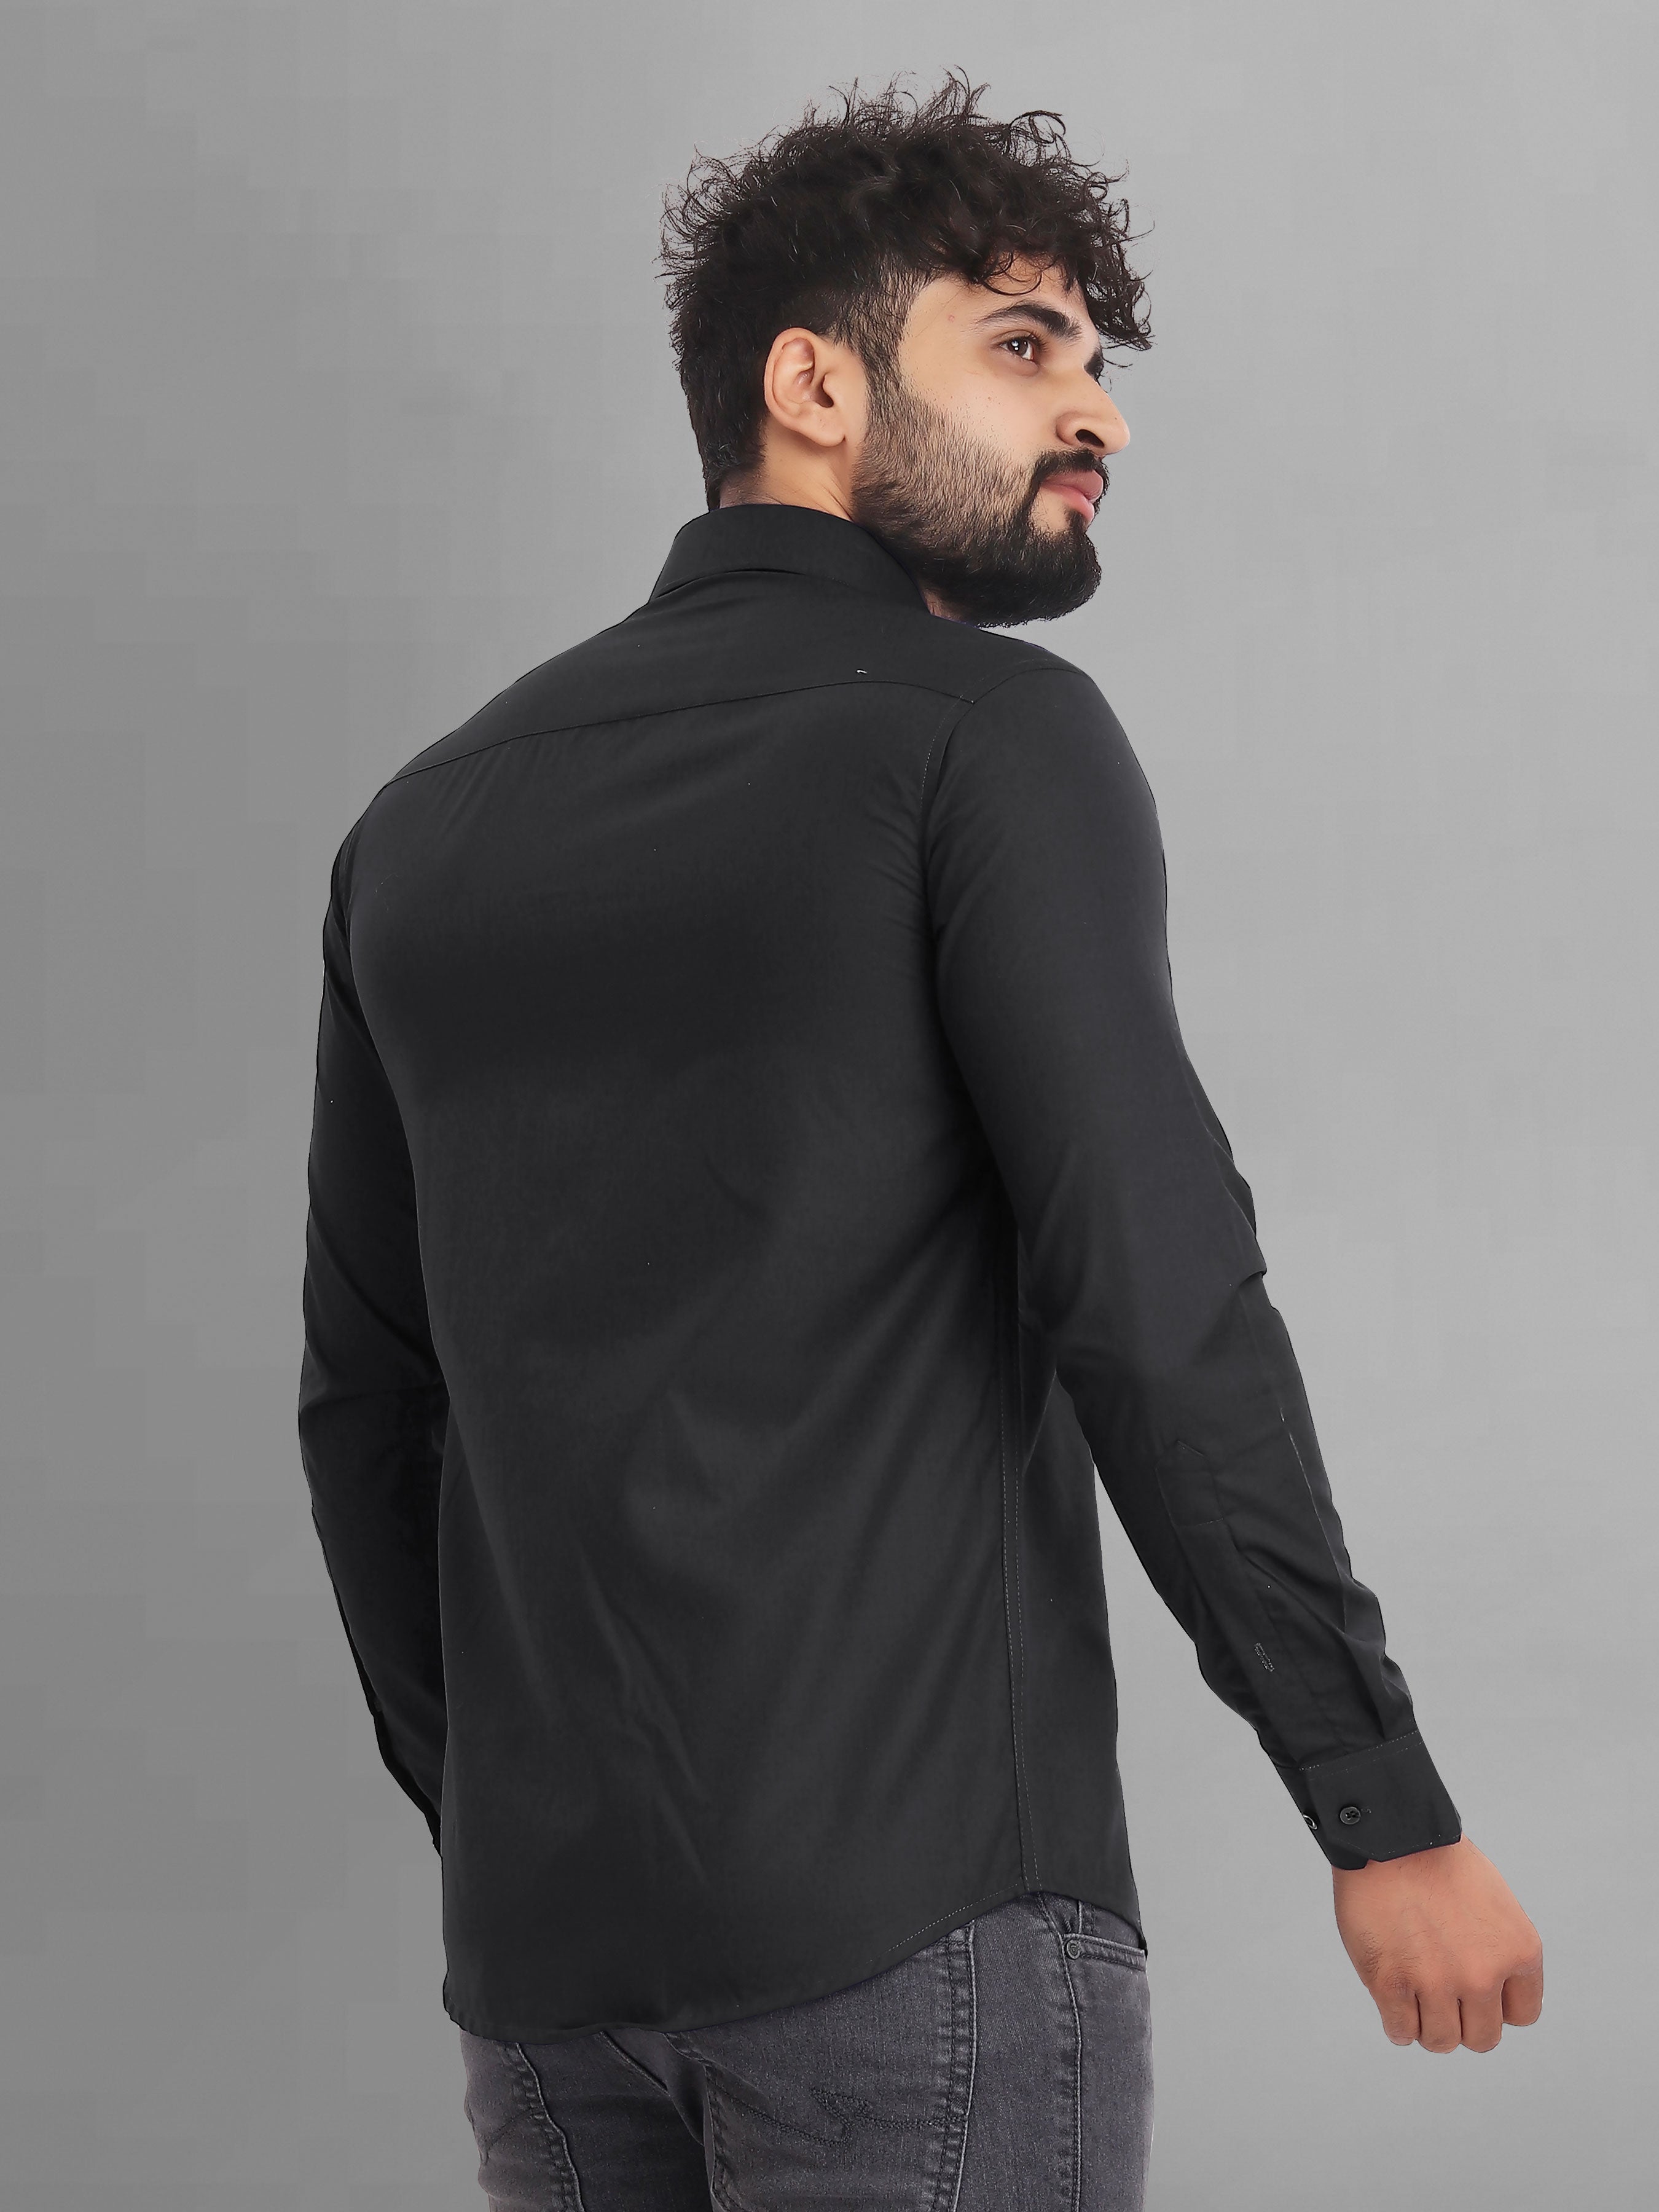 Black Soft and cozy henley casual shirt